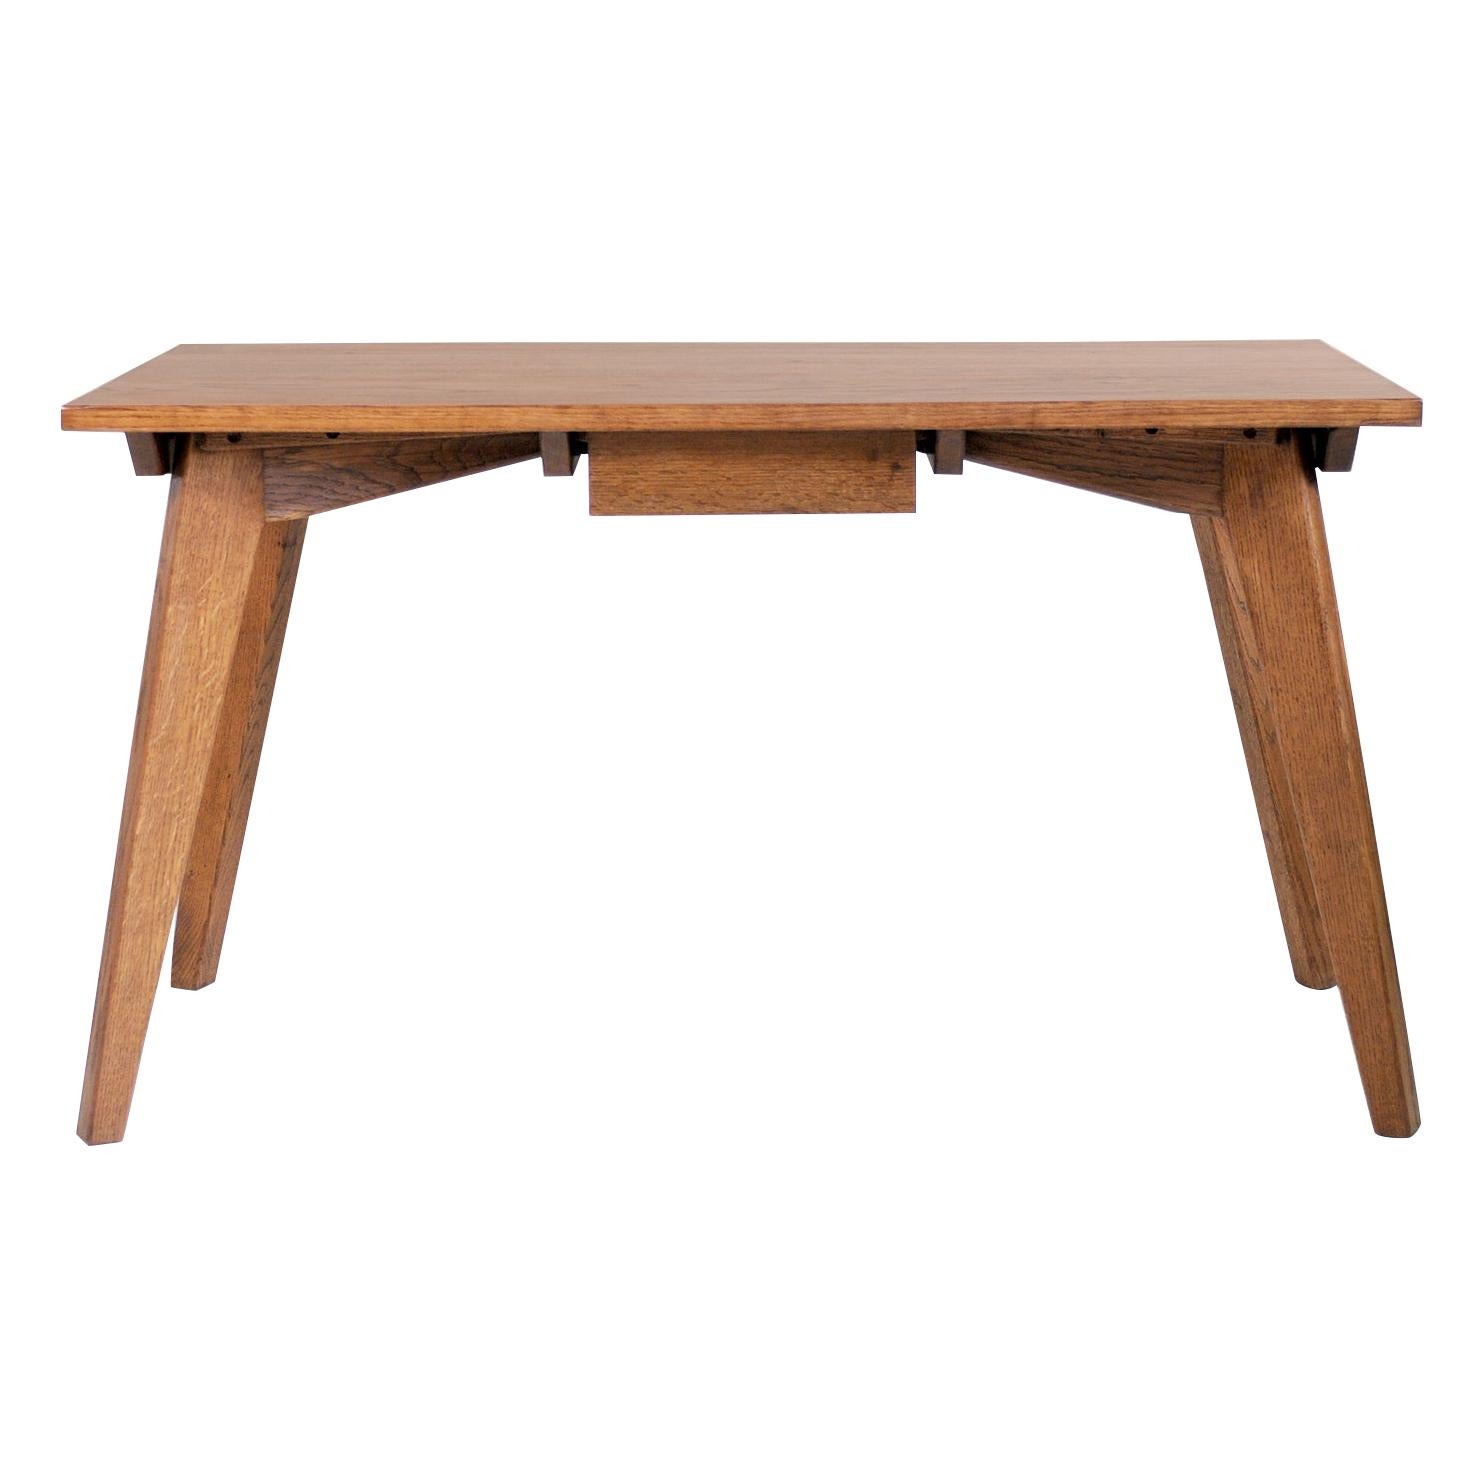 Modernist Oak Table, French Reconstruction, 1950